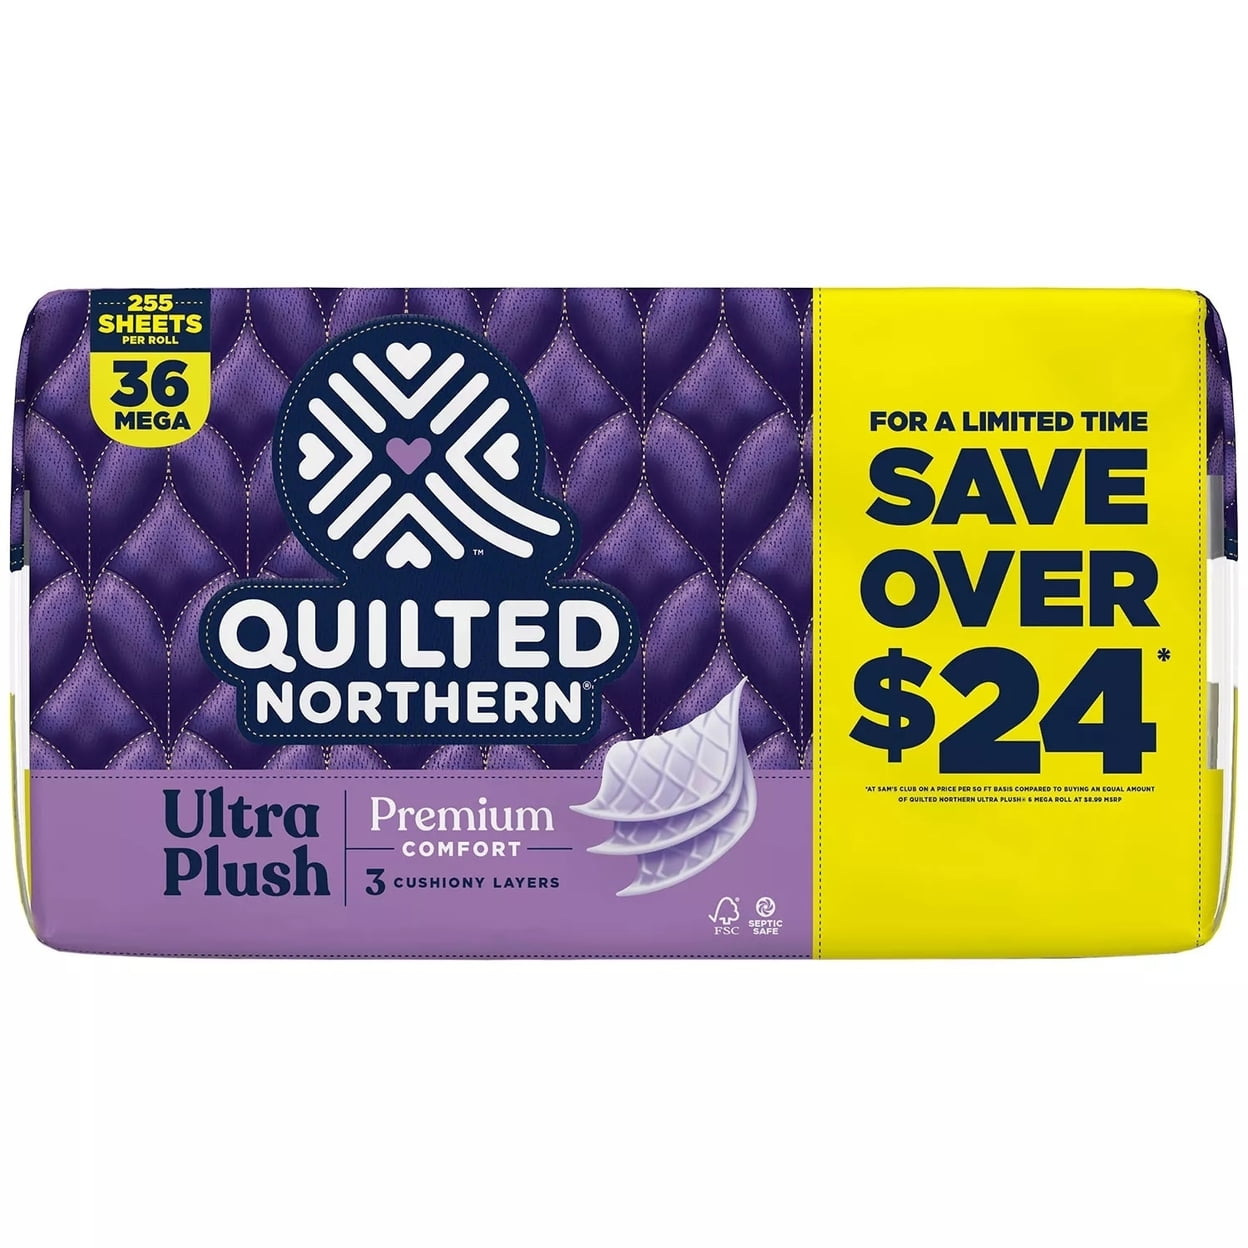 Quilted Northern Ultra Plush® Toilet Paper, 24 rolls - City Market